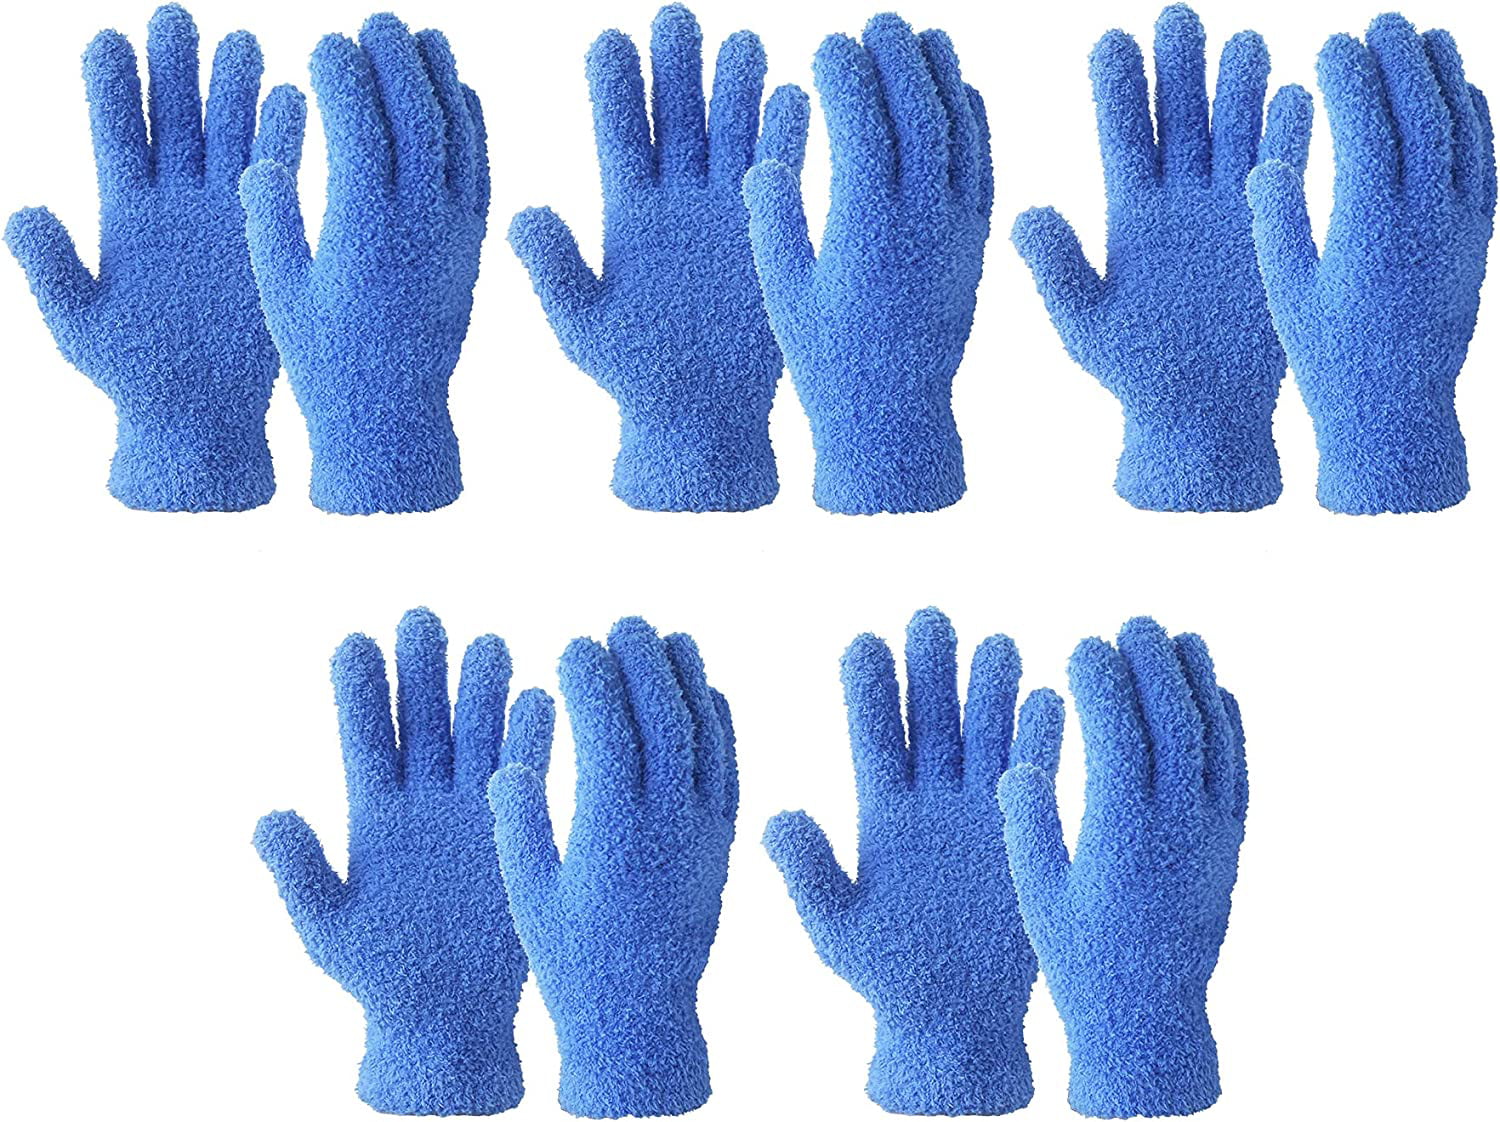  BLMHTWO 2 Pair Microfiber Gloves Washable Dusting Gloves  Reusable Plant Dusting Gloves Microfiber Dusting Gloves Cleaning Gloves for  Plants House Kitchen Cleaning Car Blinds Lamps : Health & Household